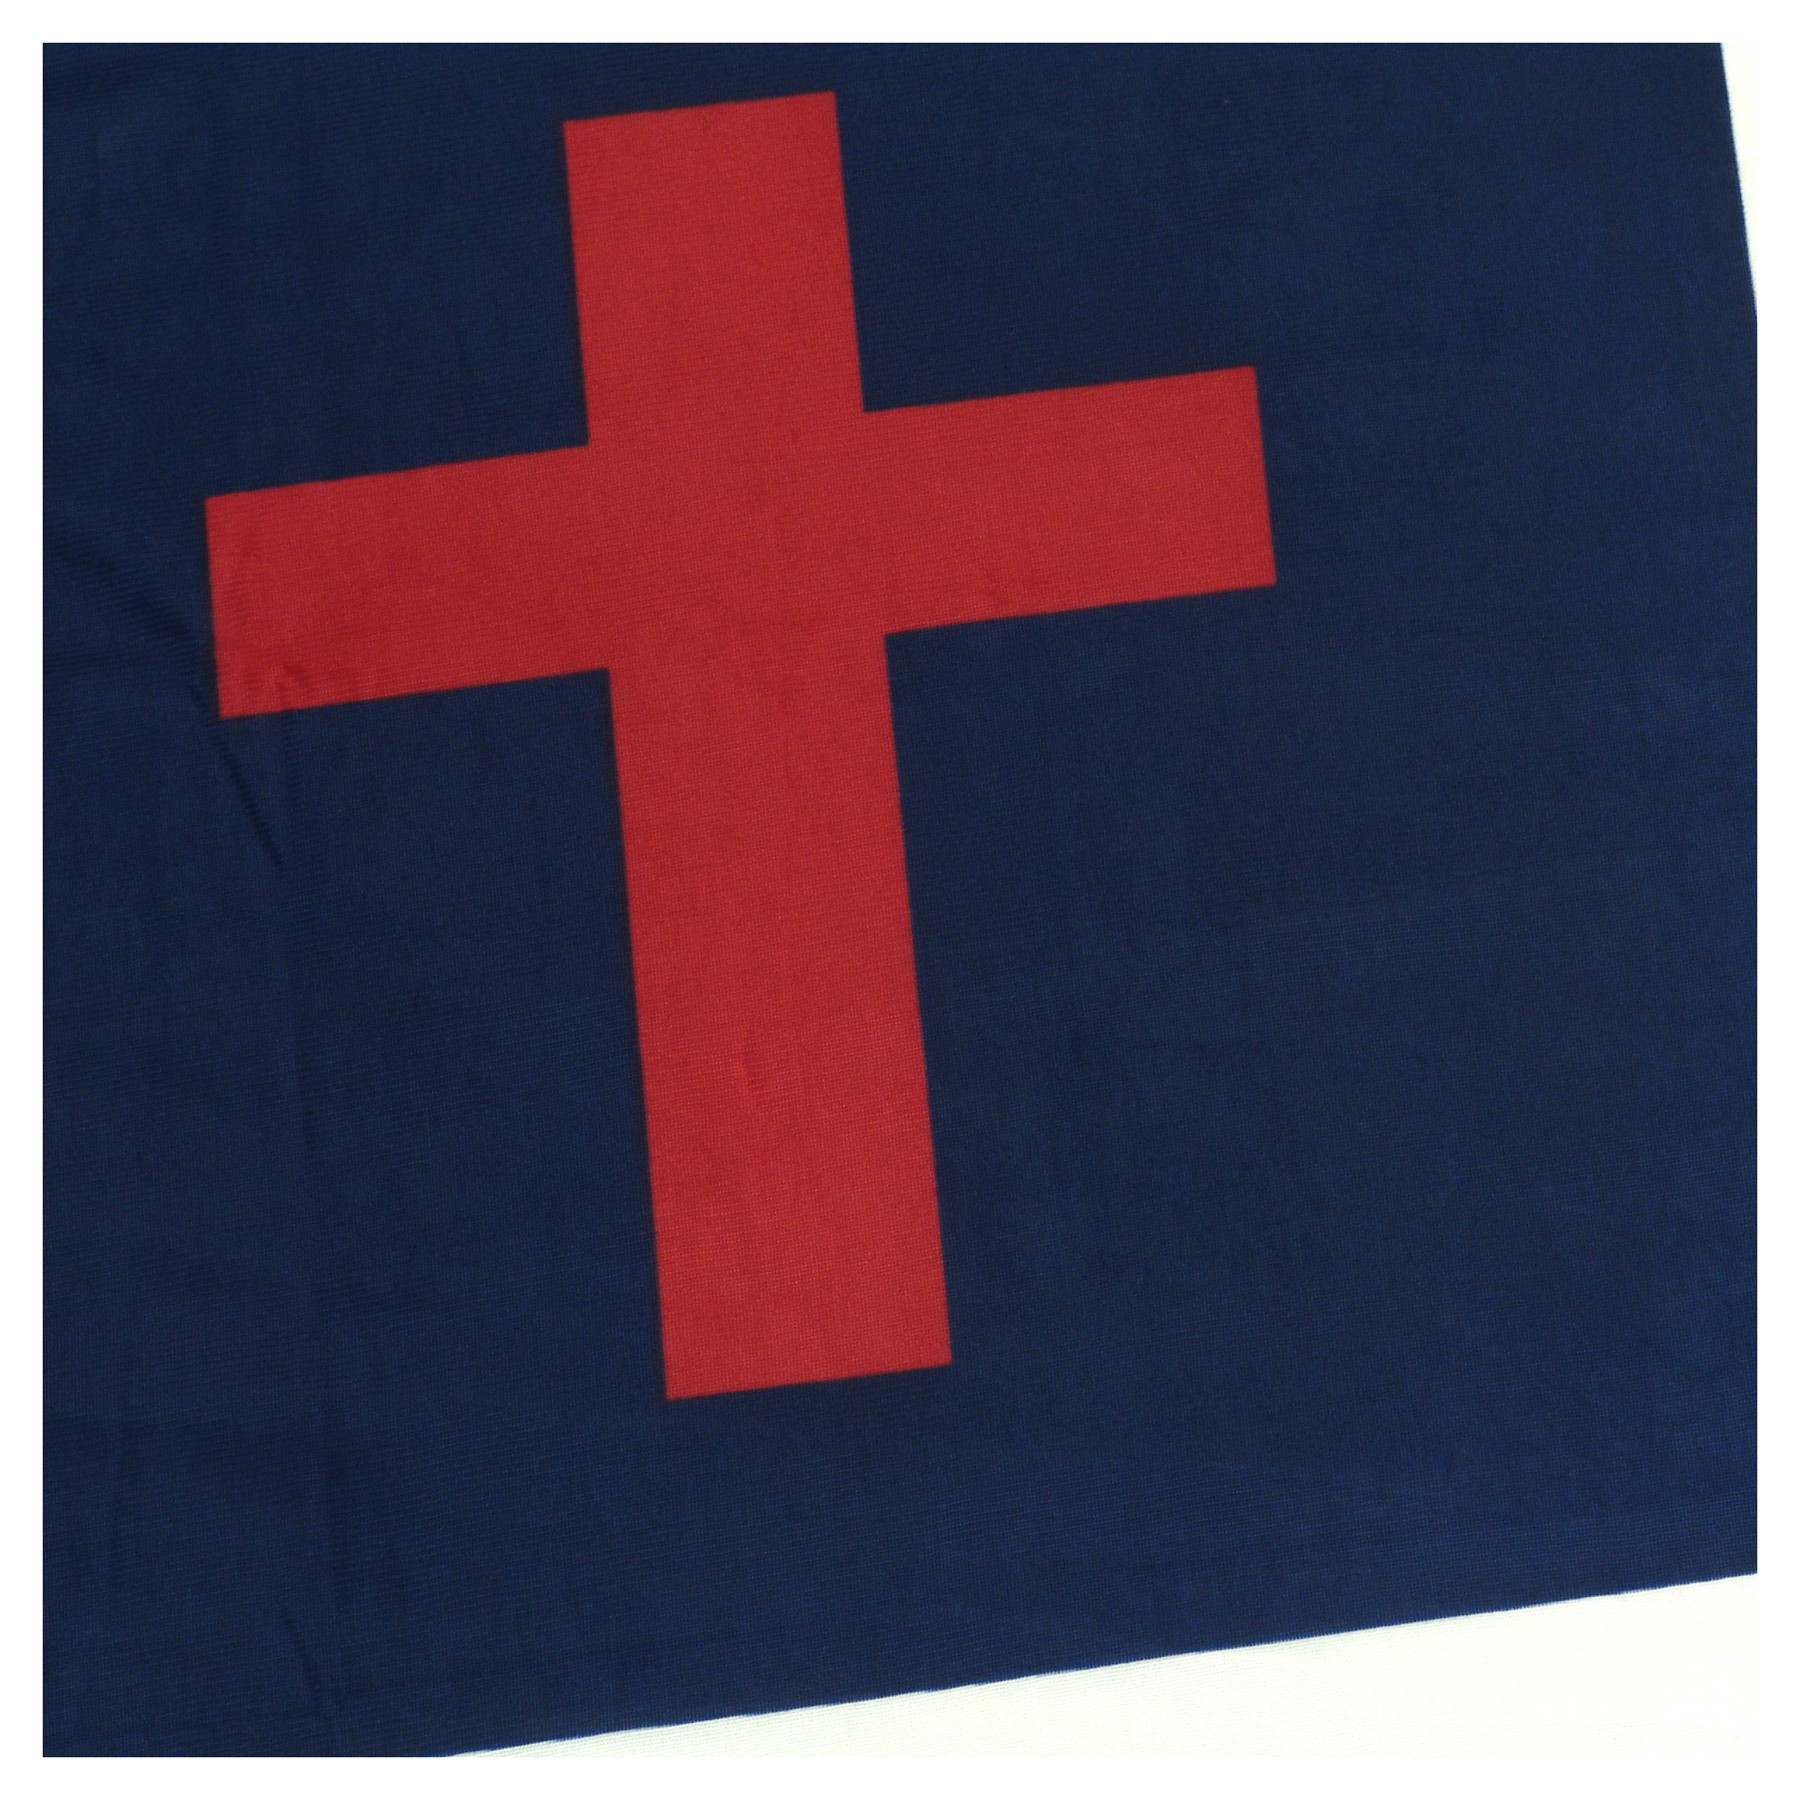 free clip art of the christian flag - photo #14